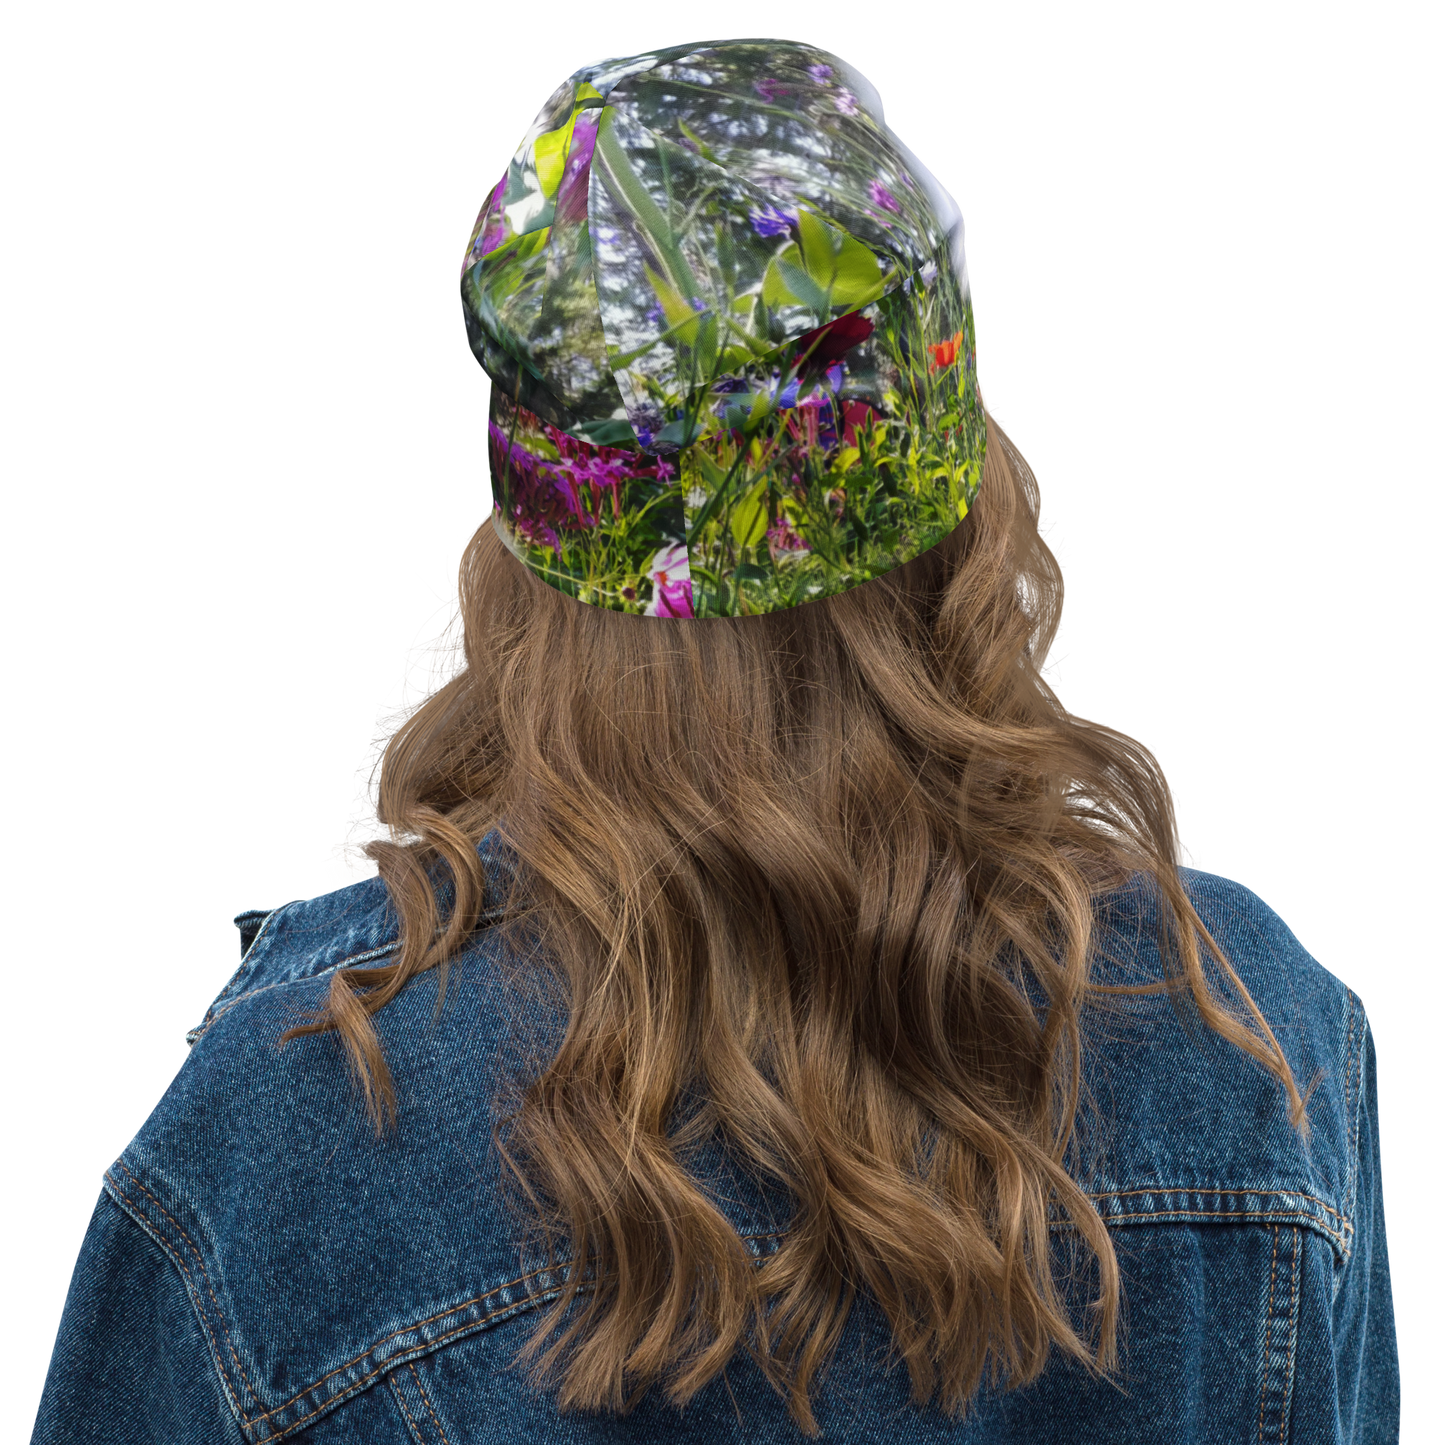 The FLOWER LOVE Collection - "Dreamy Dandelions" Design Beanie - Lightweight, Cute Chemo Hat